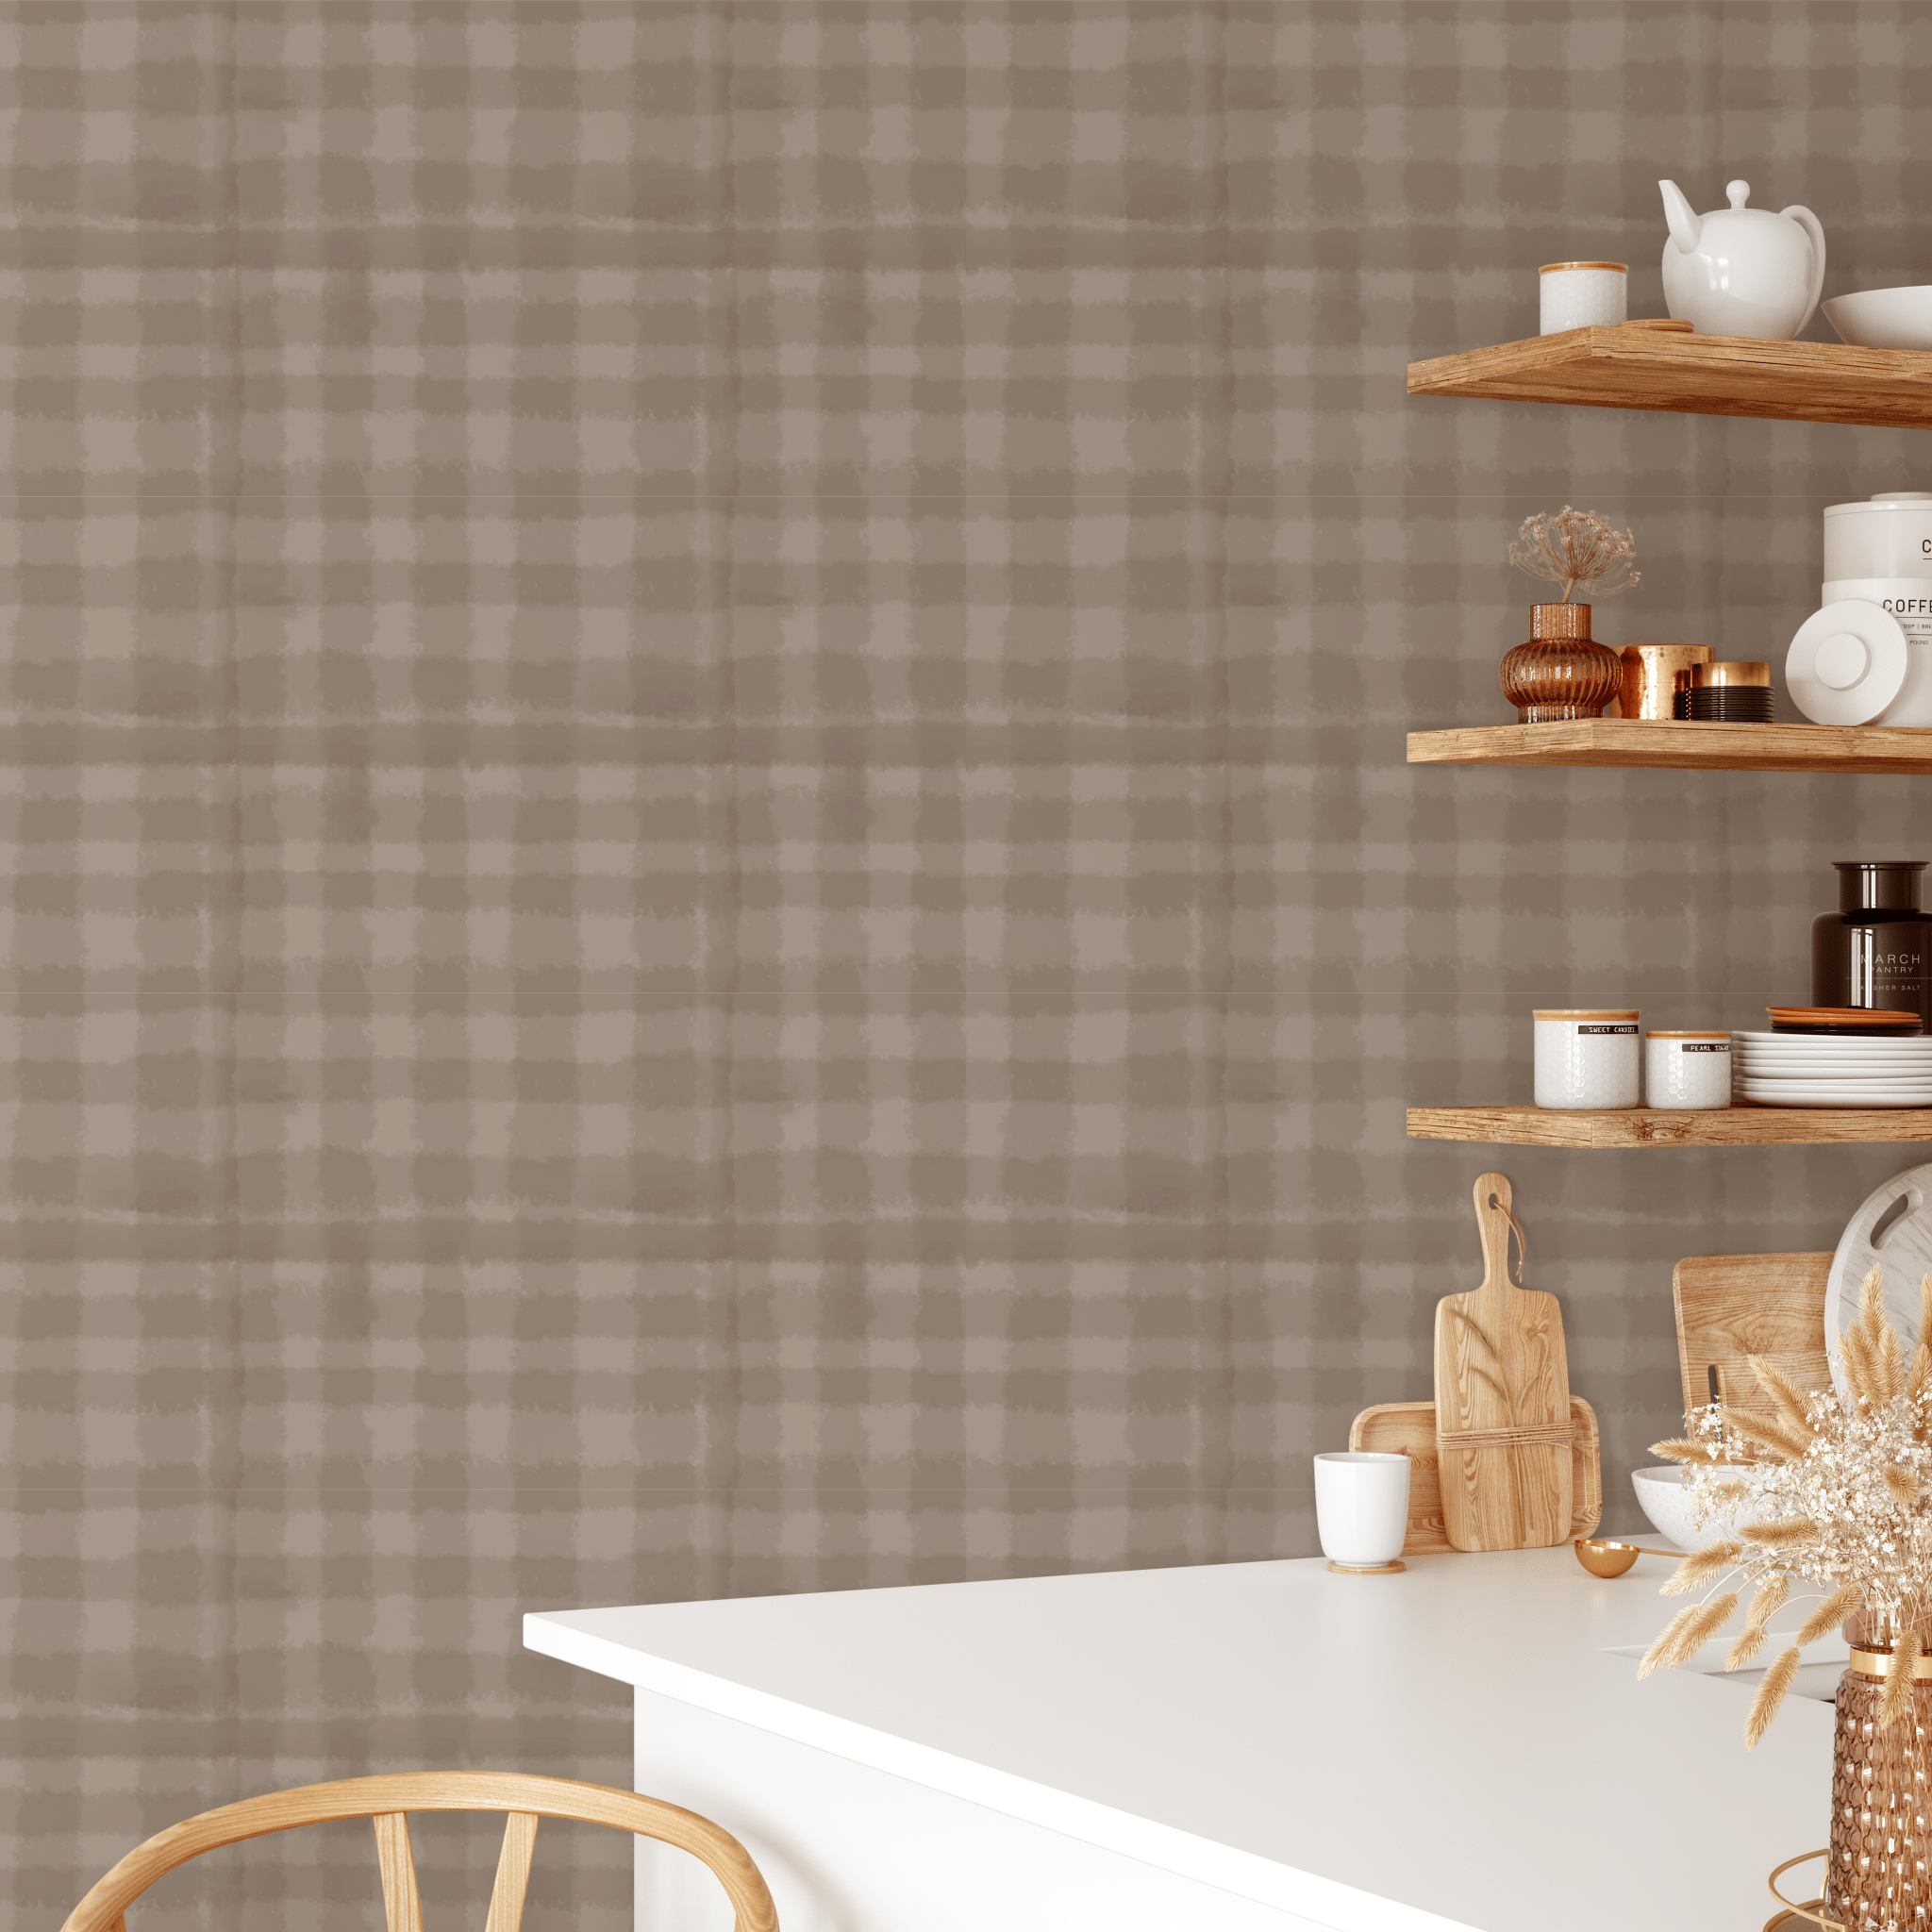 Tan Plaid Gingham design on peel and stick wallpaper for kitchen decor